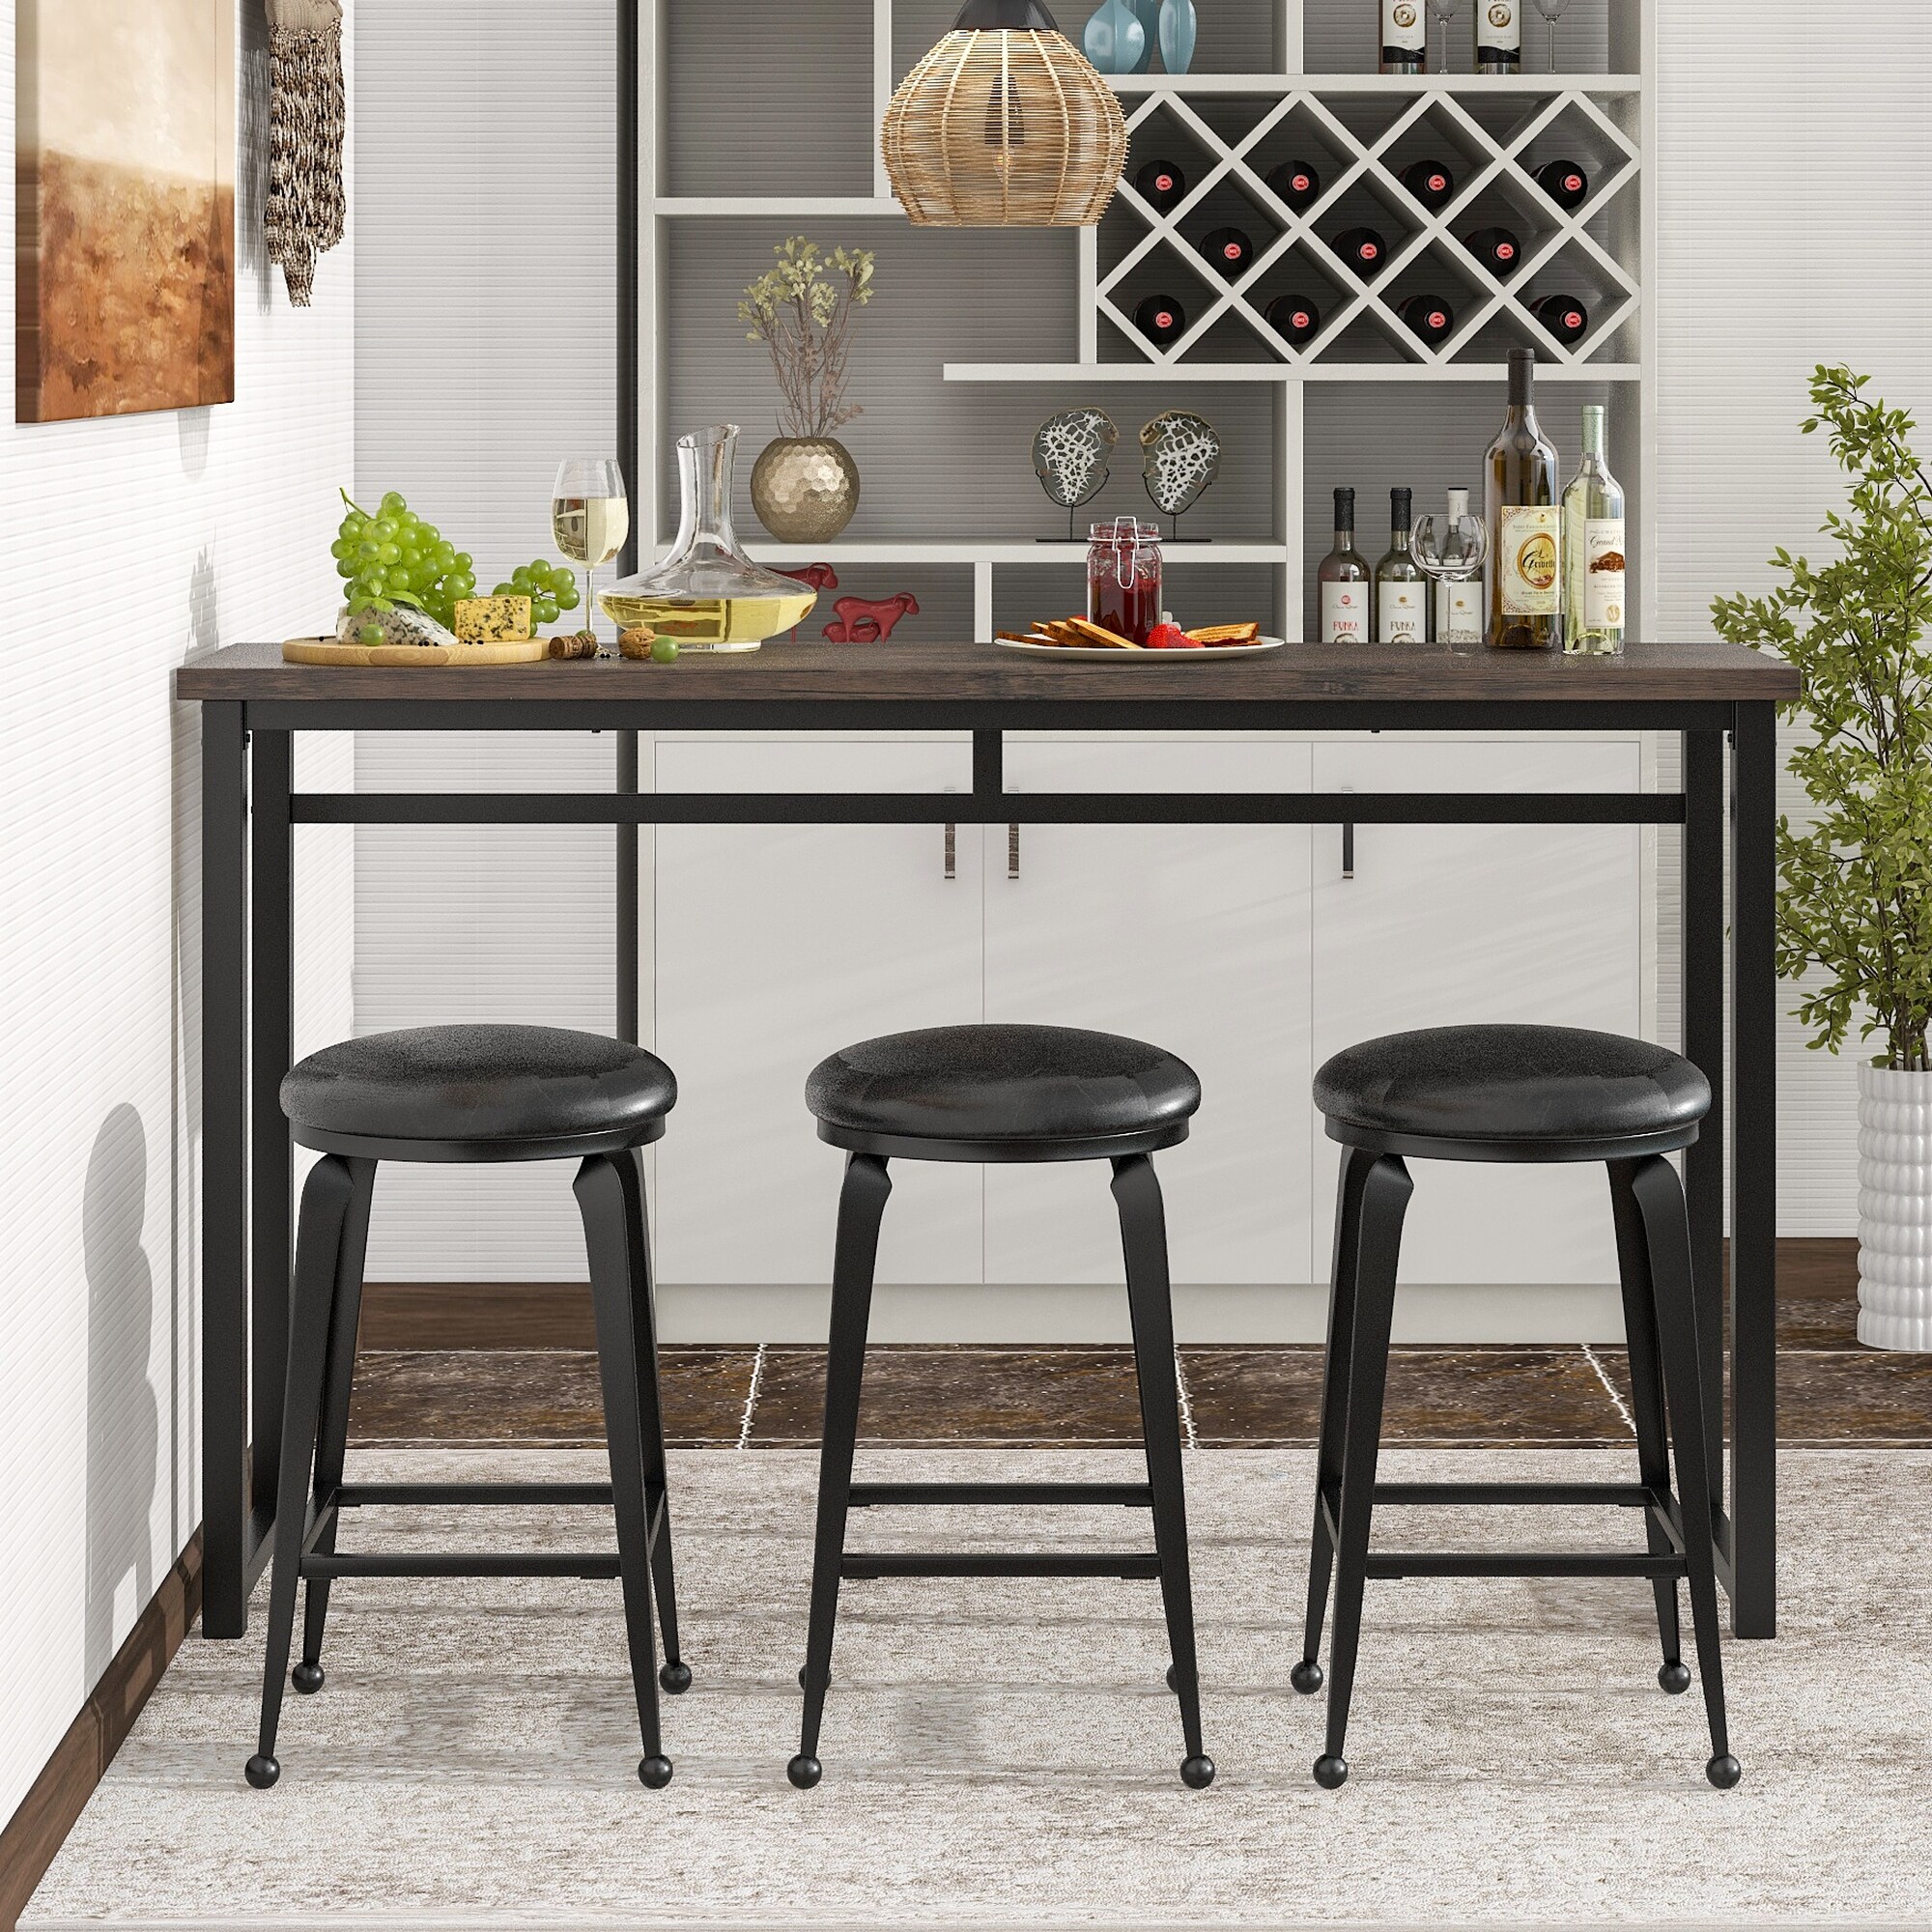 Bar Table with 3 Barstools for Dining Room Bistro, 4-Piece Kitchen